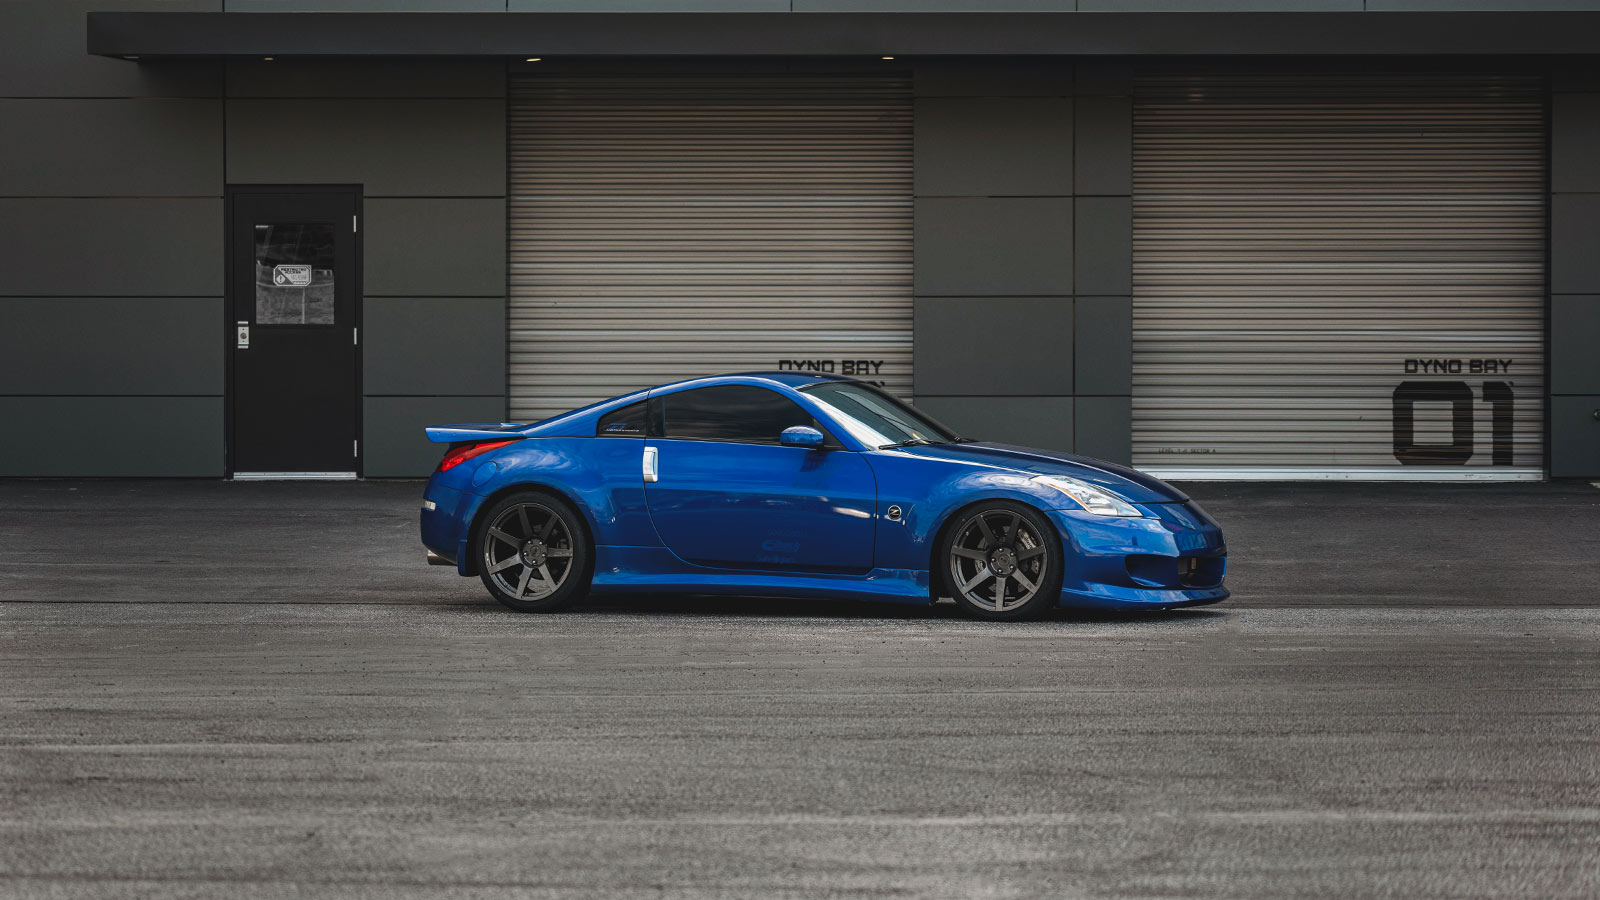 SUMMER MODS The ultimate upgrades for your 350Z